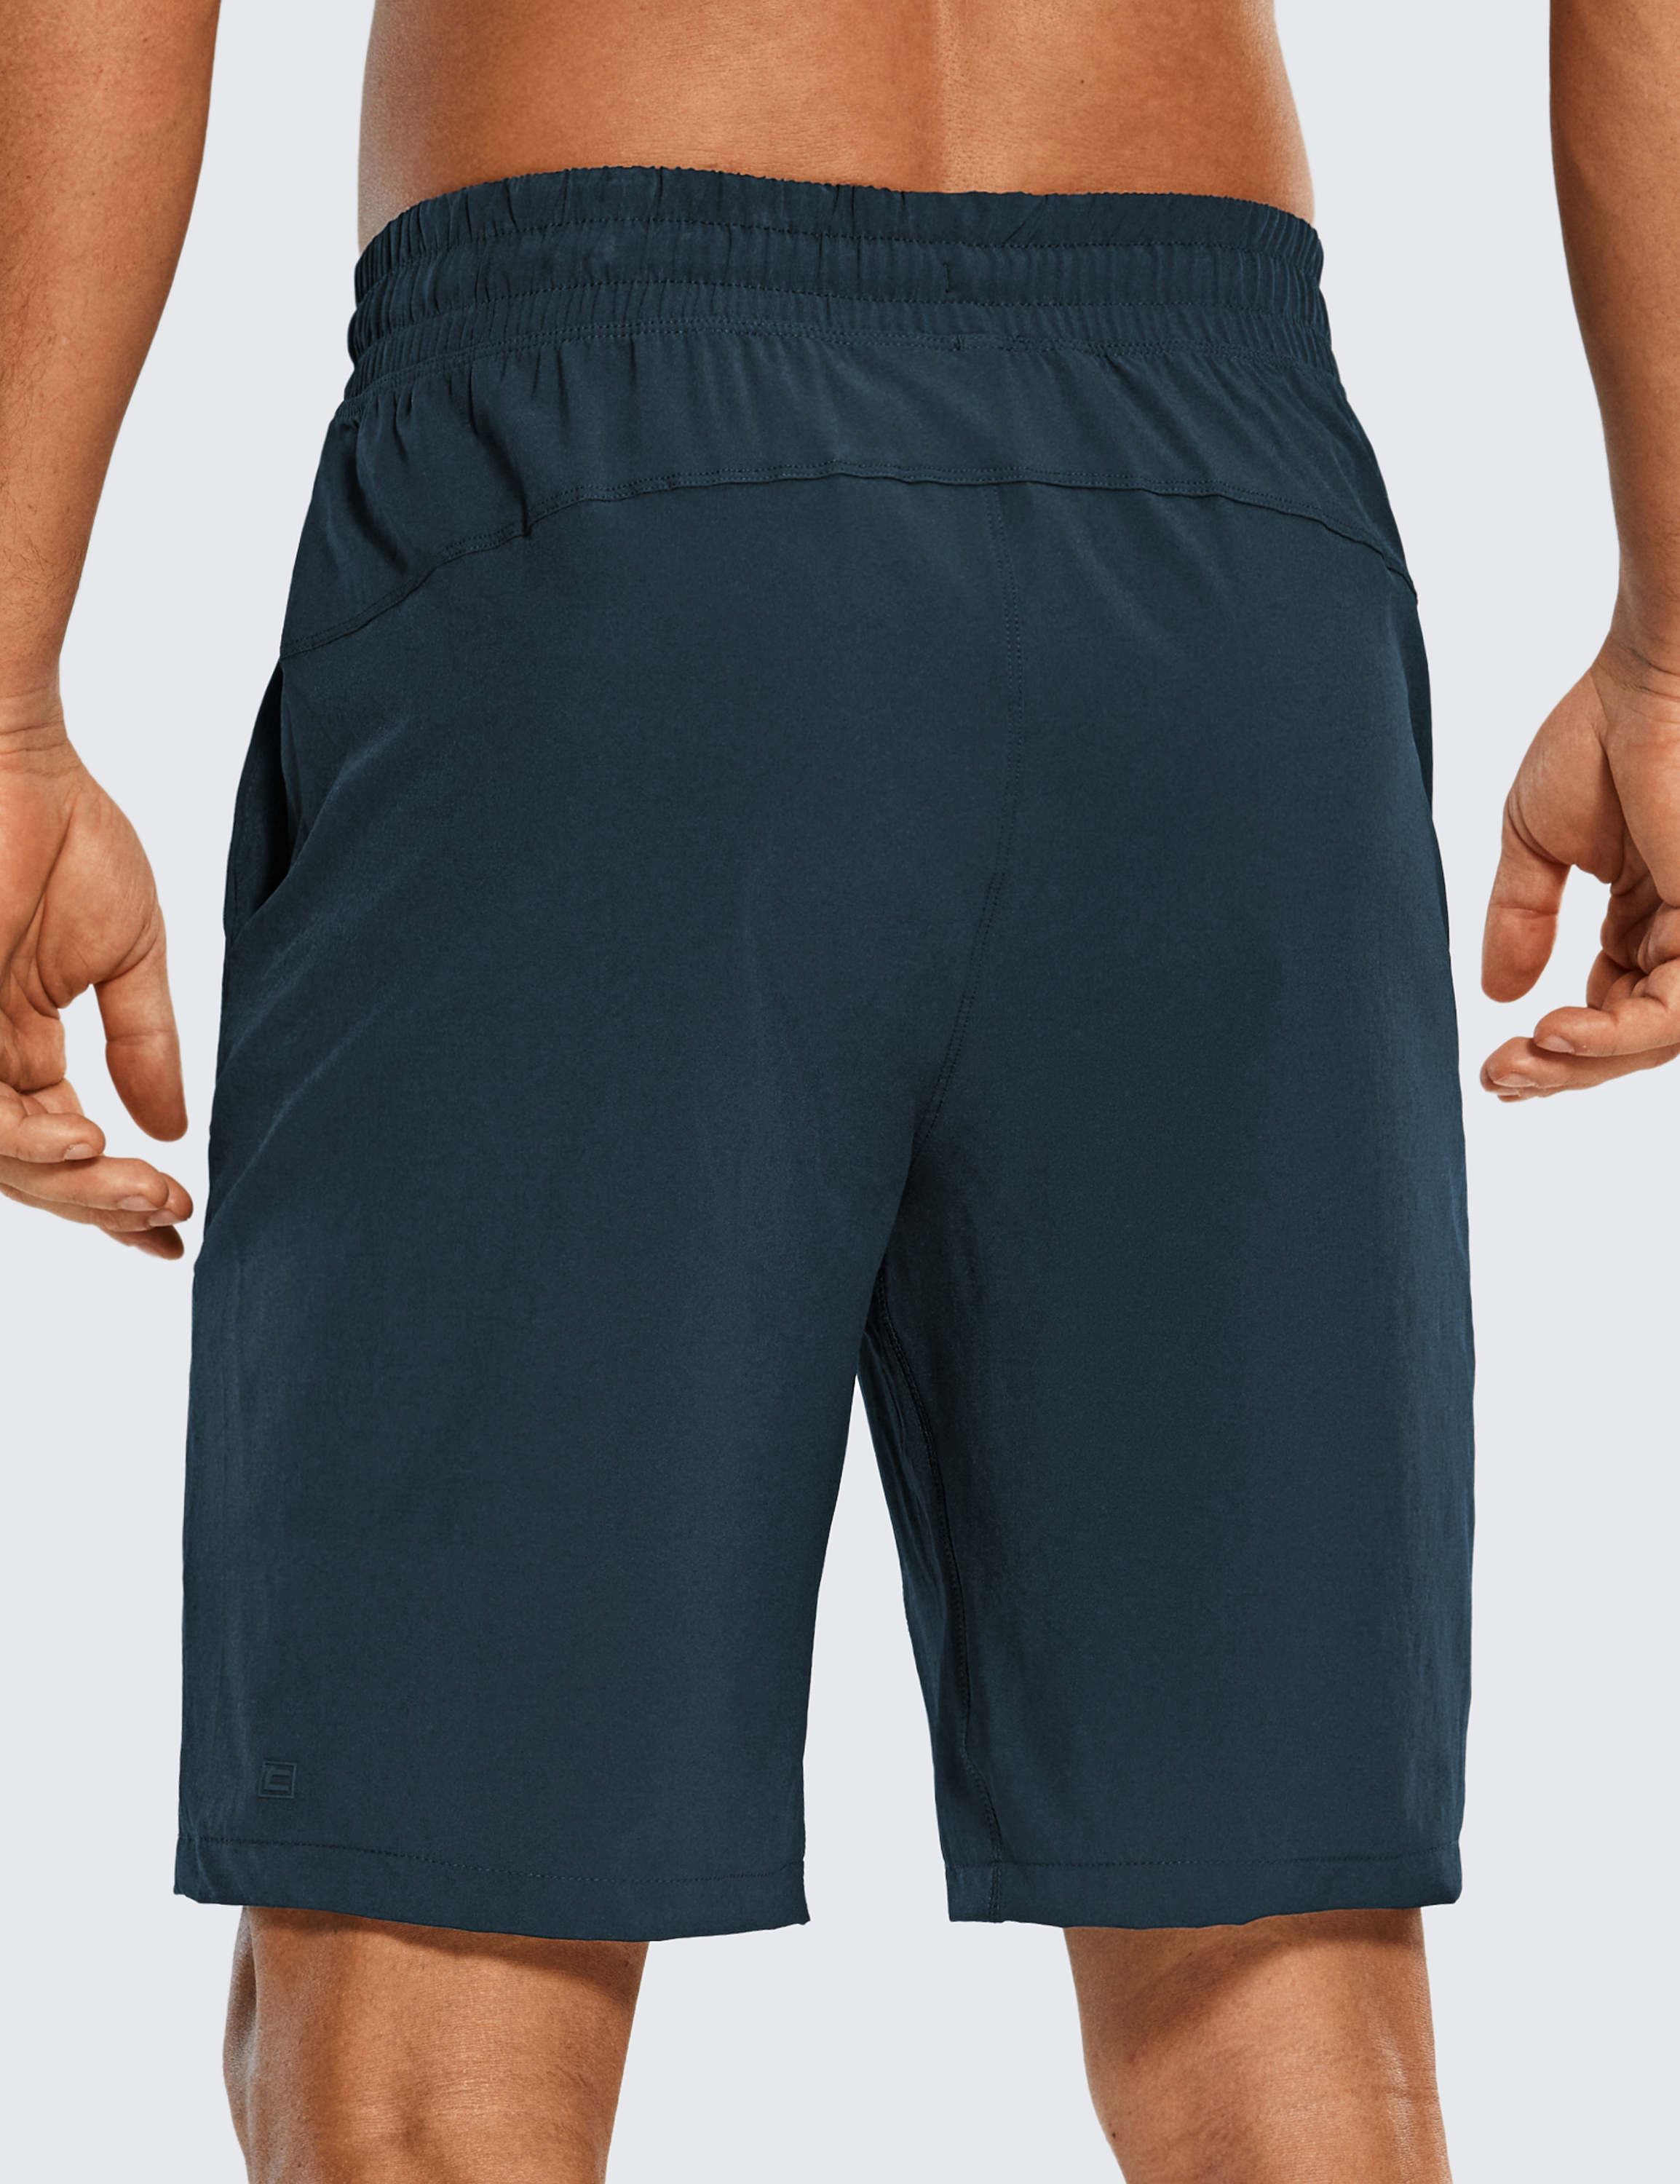 CRZ YOGA Men's Linerless Workout Shorts - 5'' Lightweight Quick Dry Running  Sports Athletic Gym Shorts with Pockets